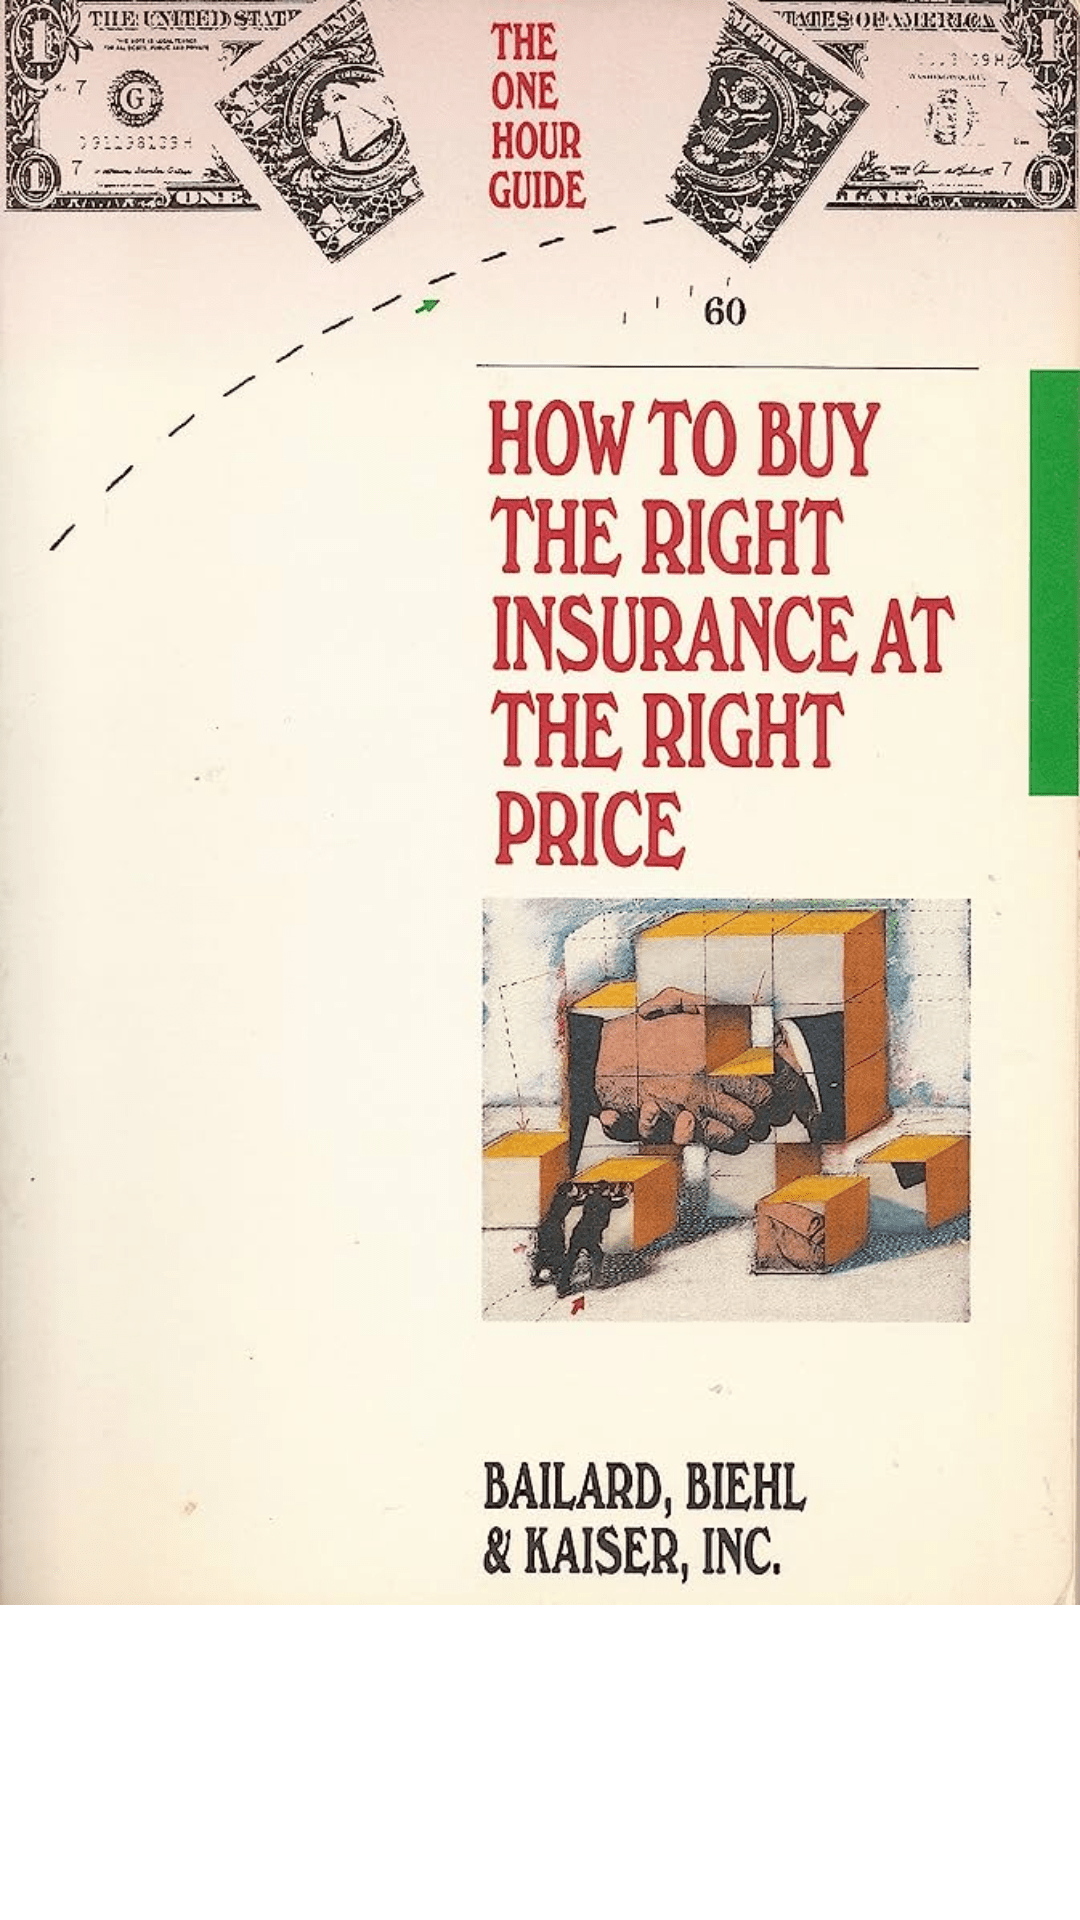 How to Buy the Right Insurance at the Right Price